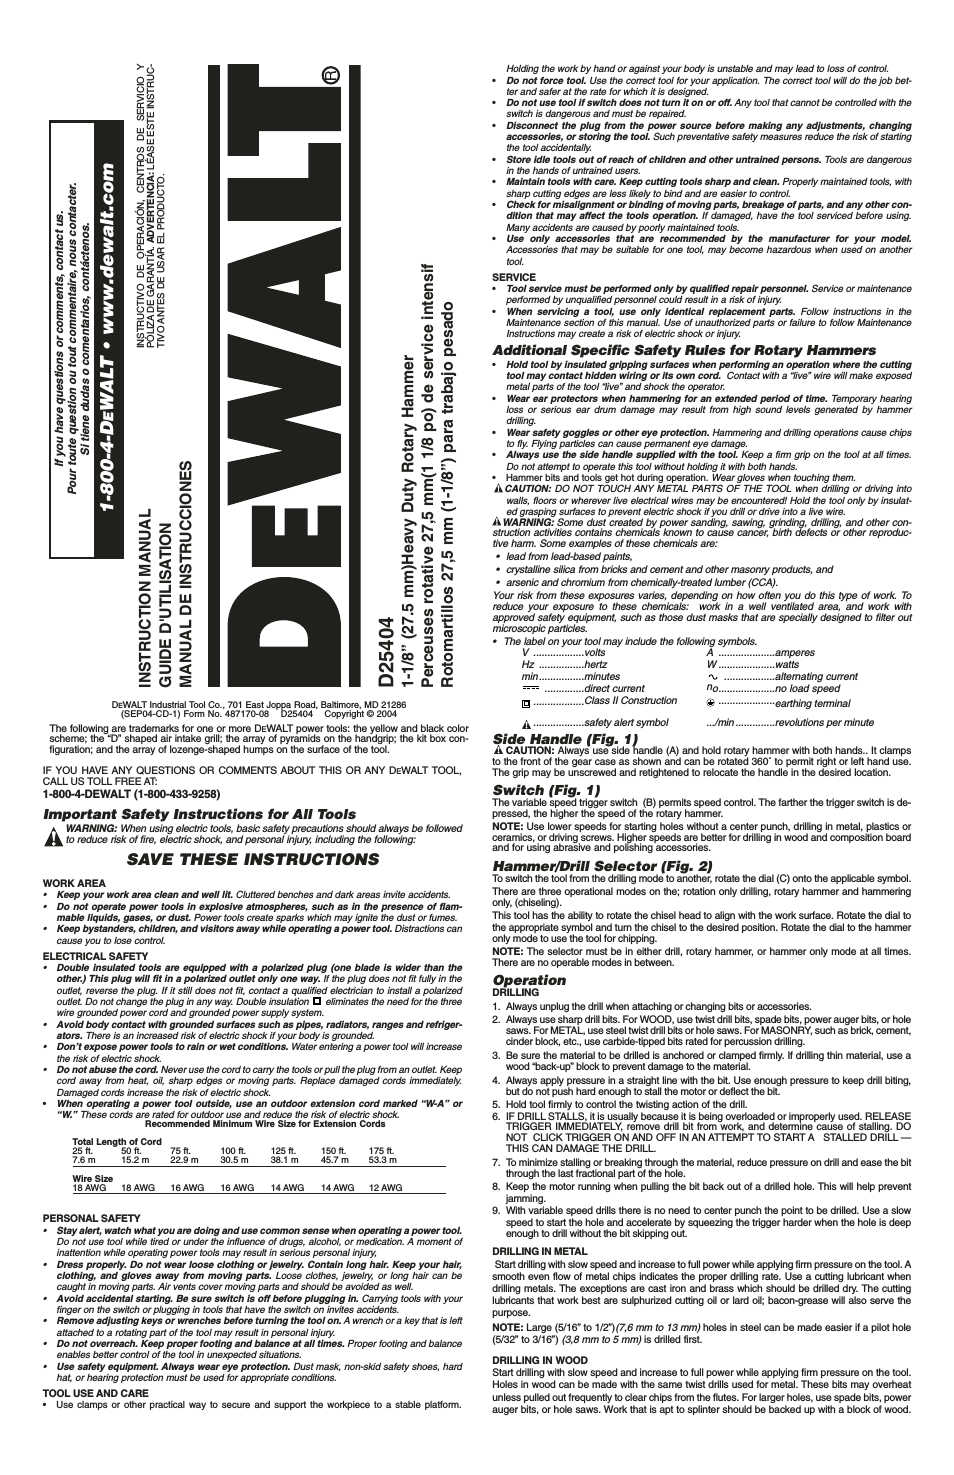 D25404 (Page 1)